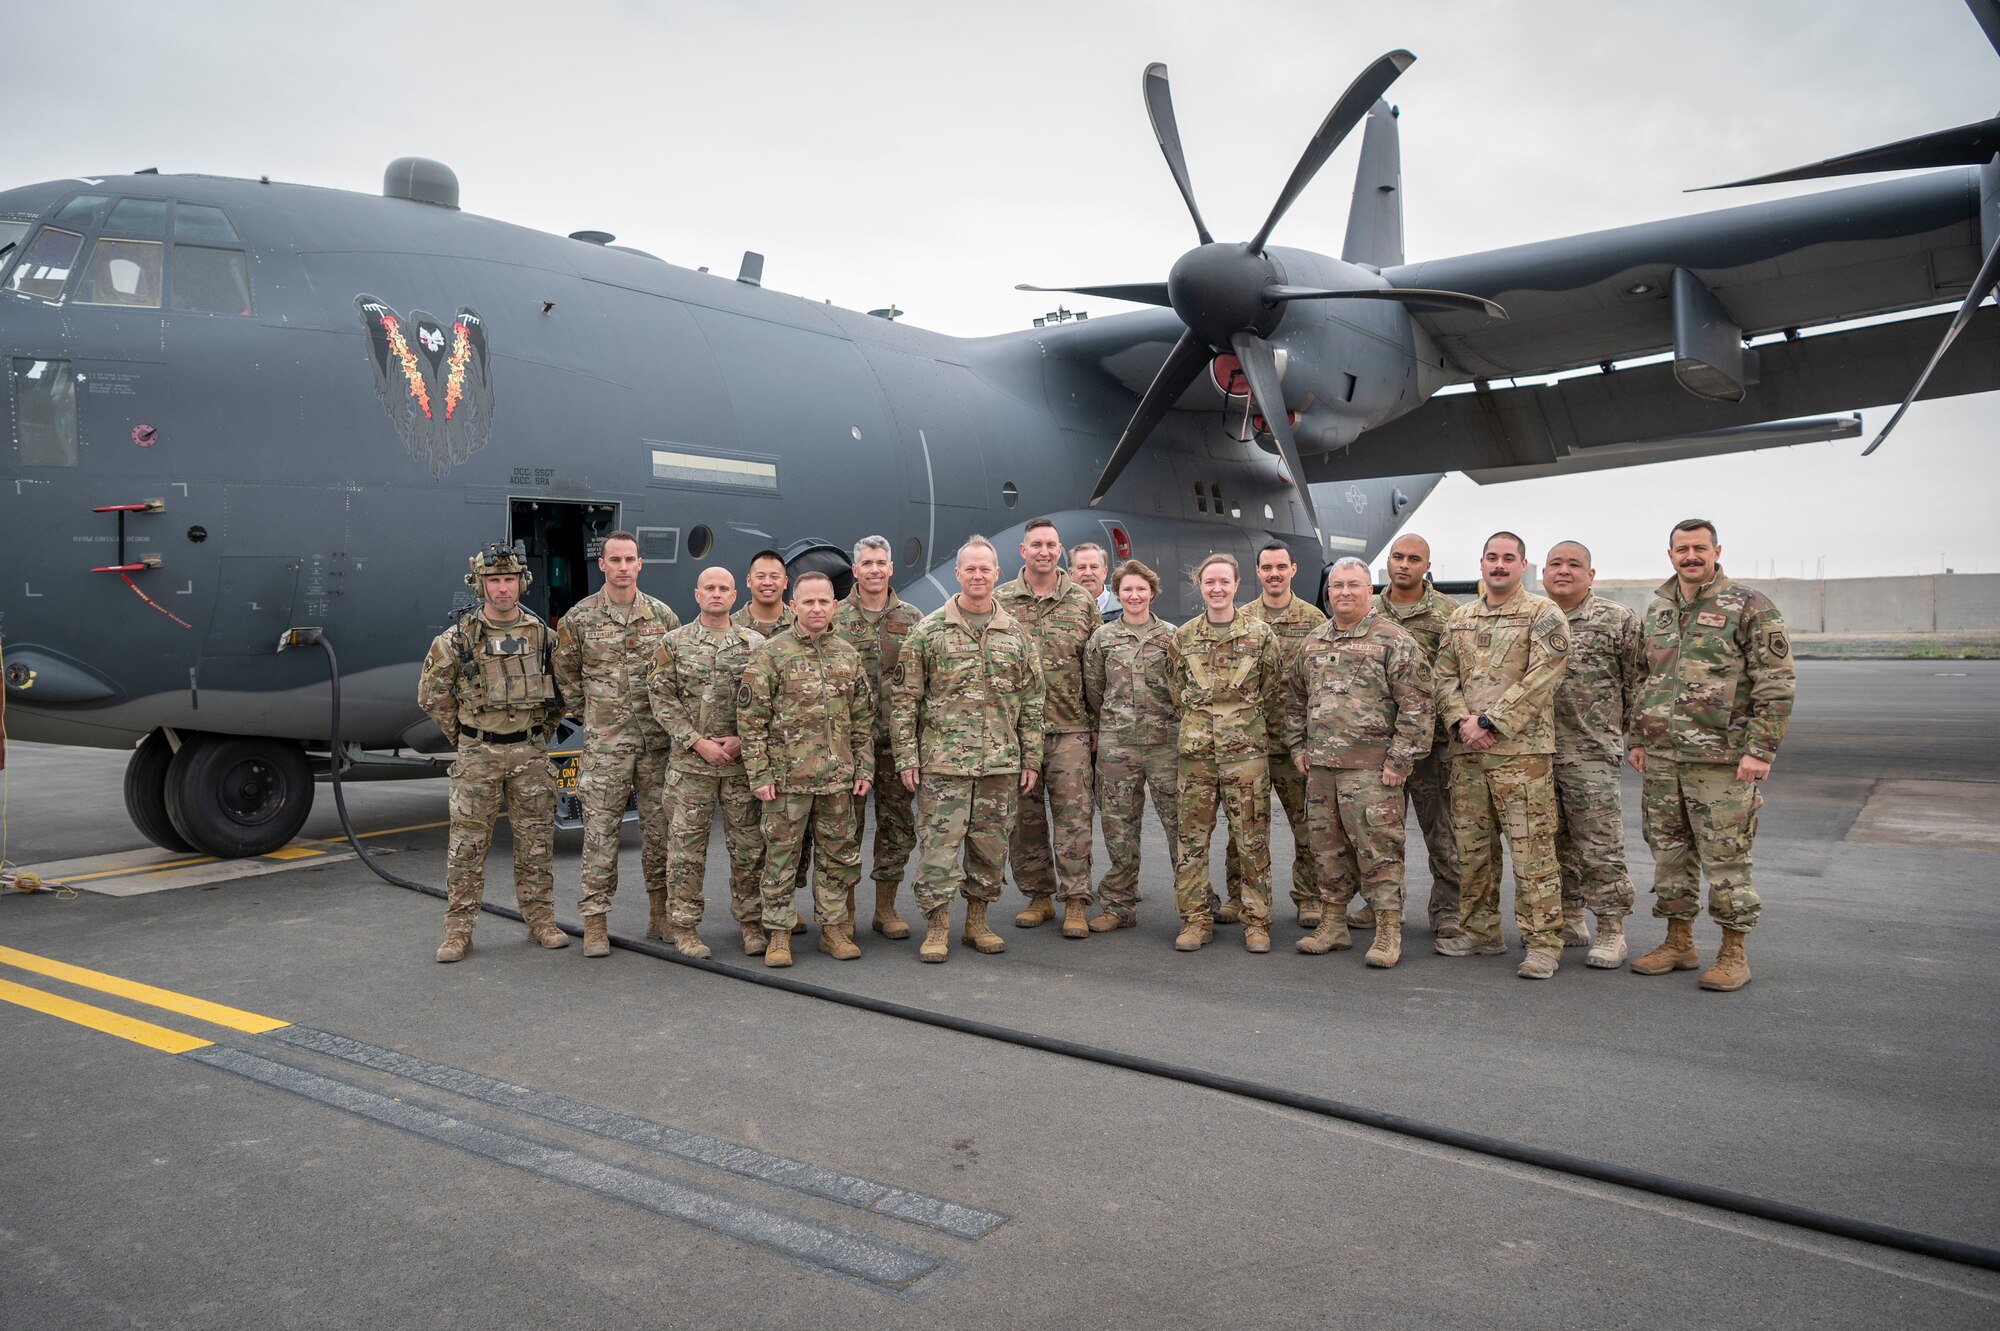 U.S. Air Force Gen. Mark Kelly, commander of Air Combat Command and Command Chief Master Sgt. John Storms, ACC, pose for a photo with Airmen in front of an AC-130J Ghostrider gunship during a tour at Ali Al Salem Air Base, Kuwait, Feb. 15, 2023.